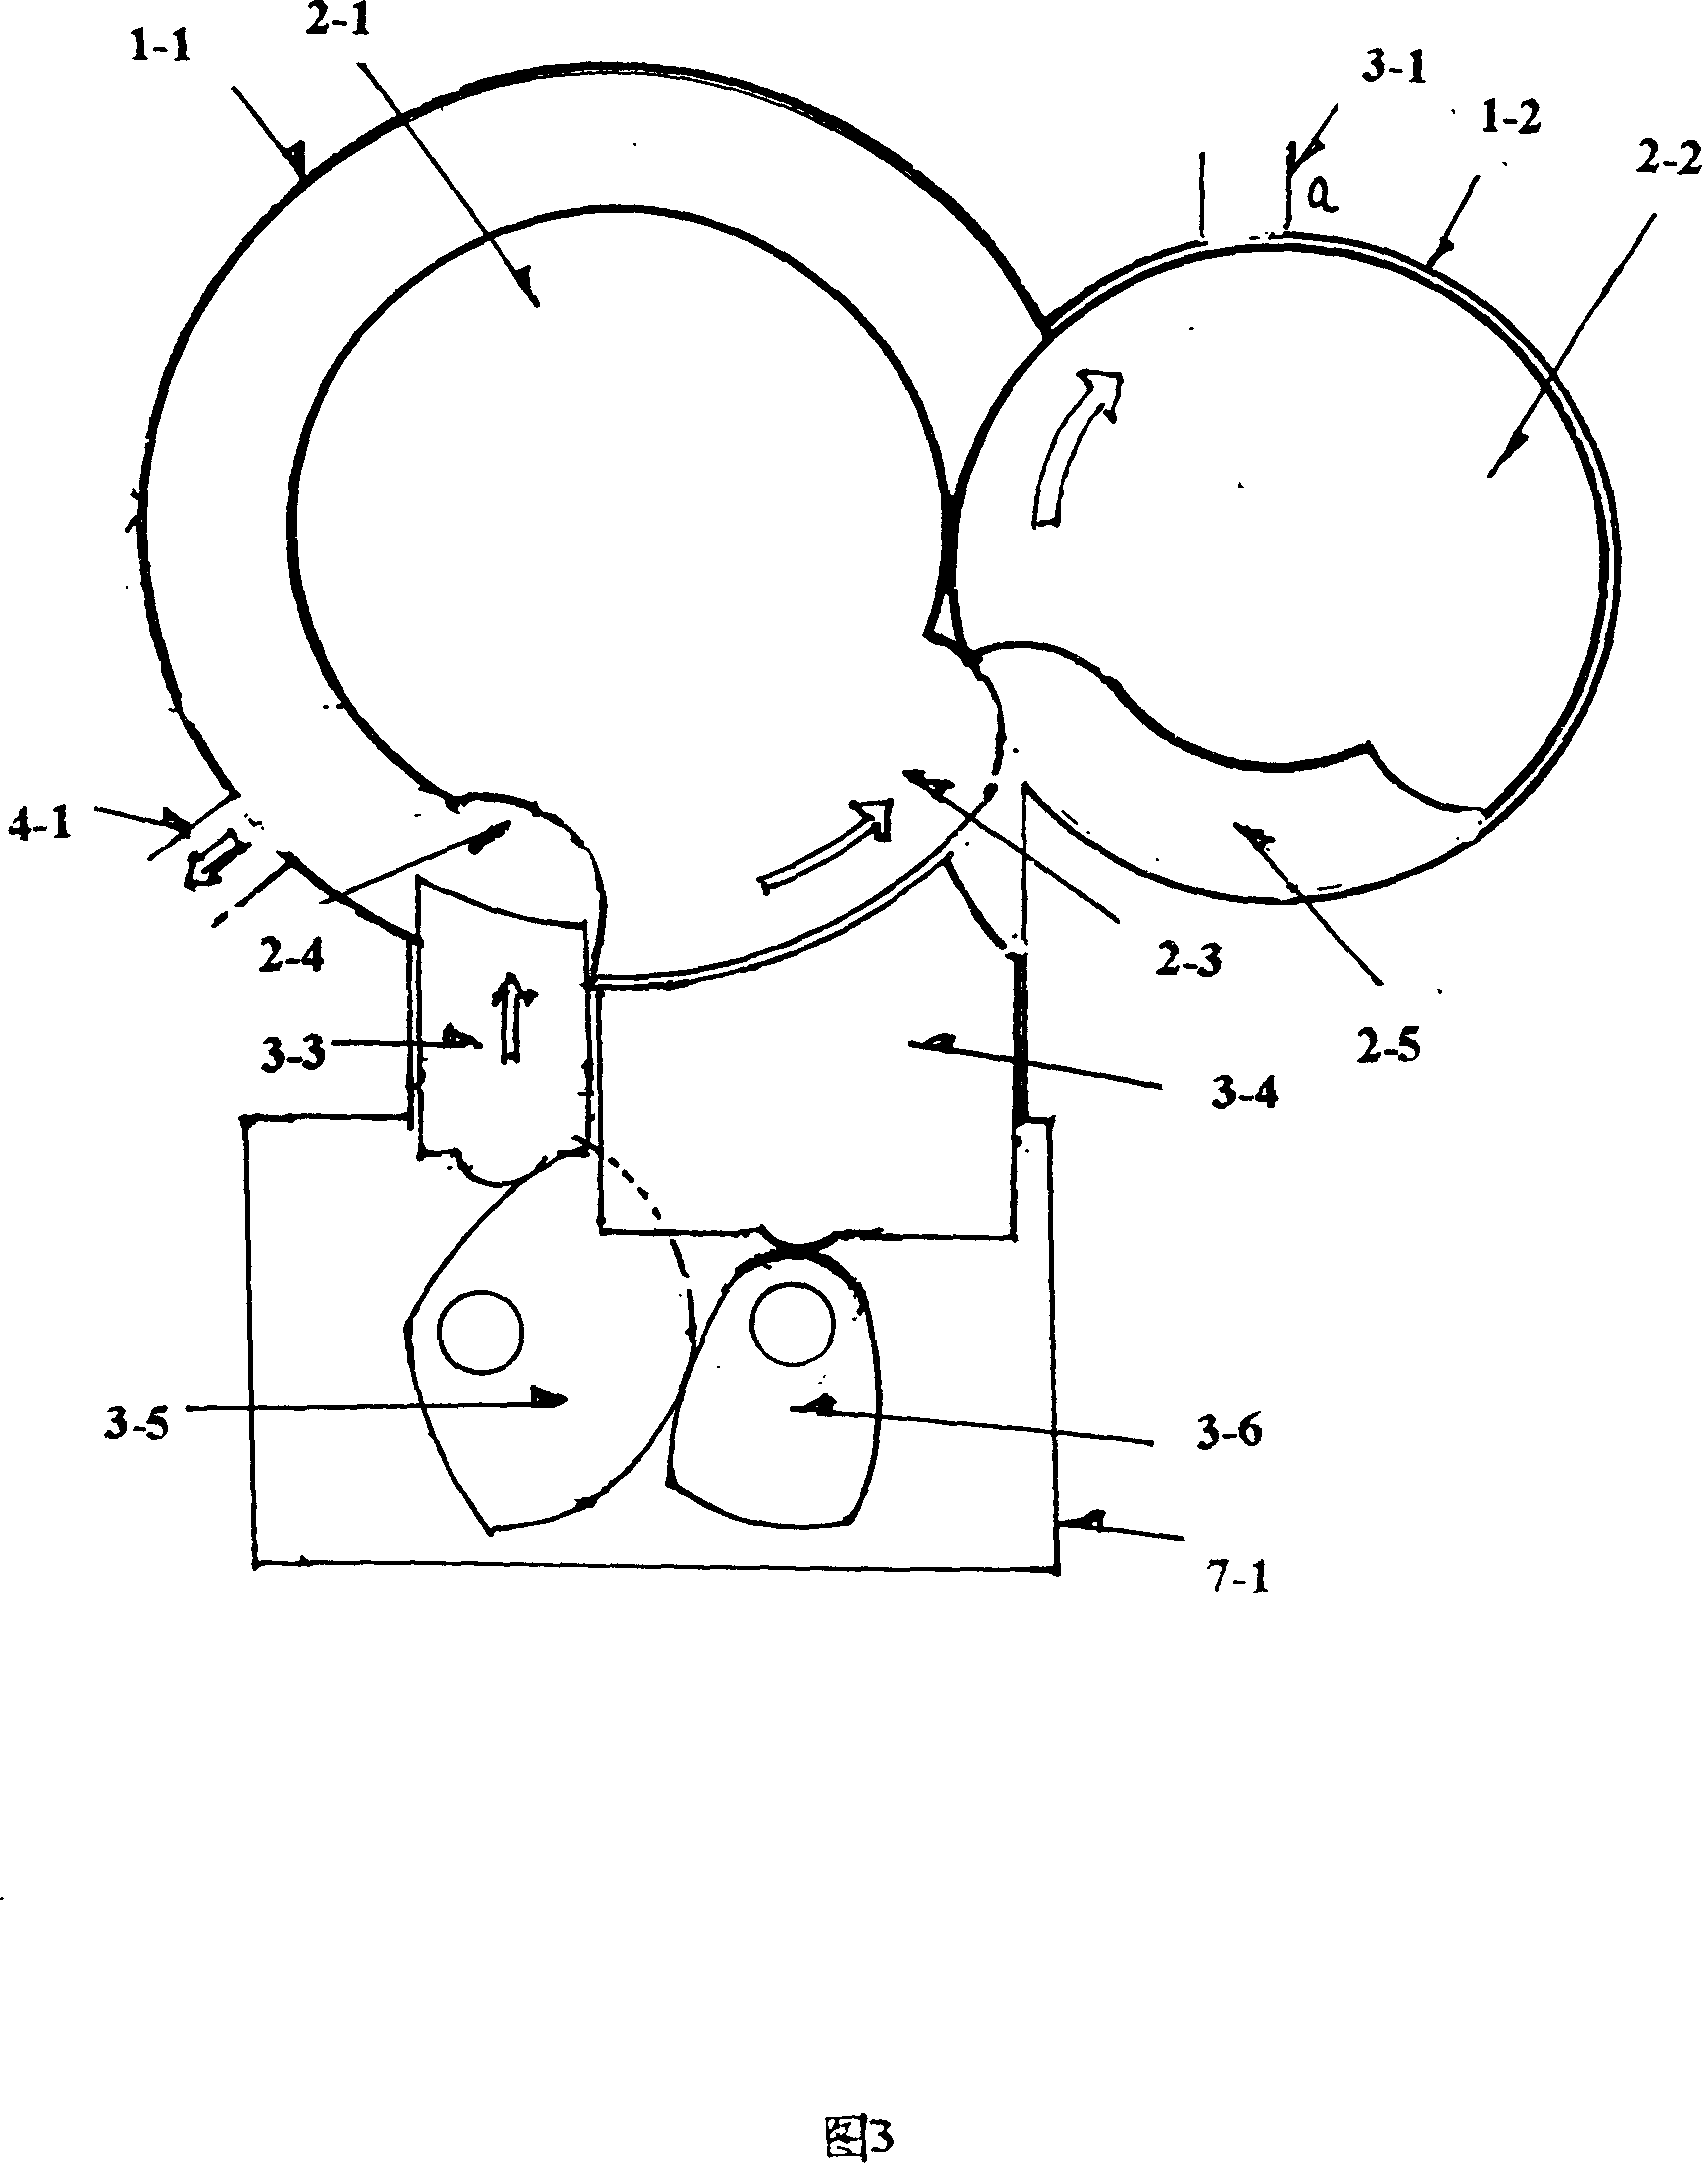 Double wheel normal rotor engine